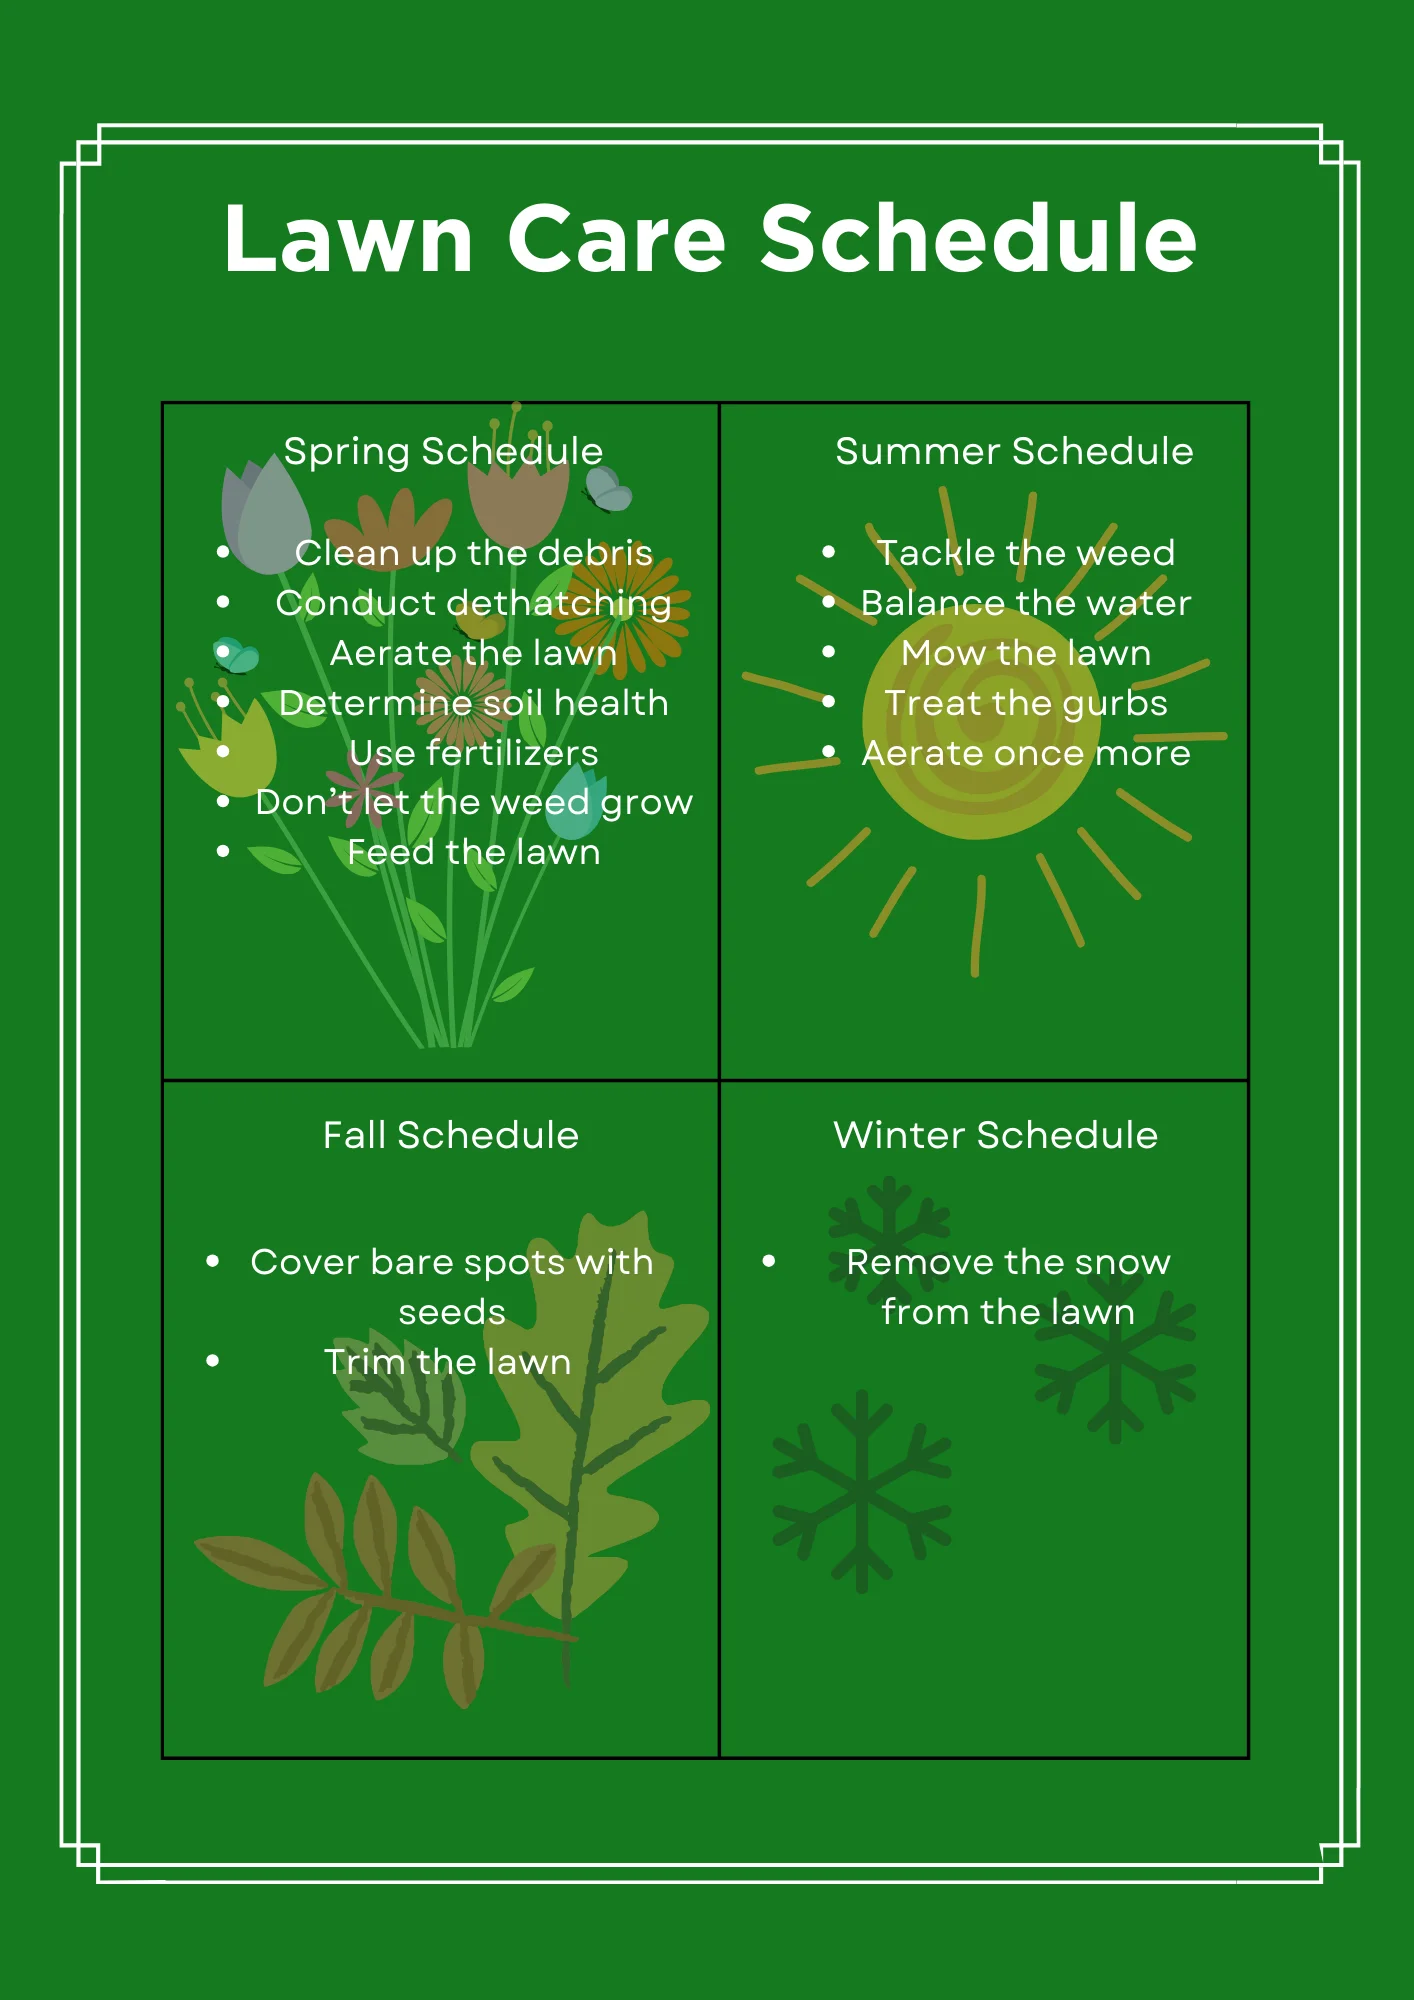 A lawn care schedule for every season